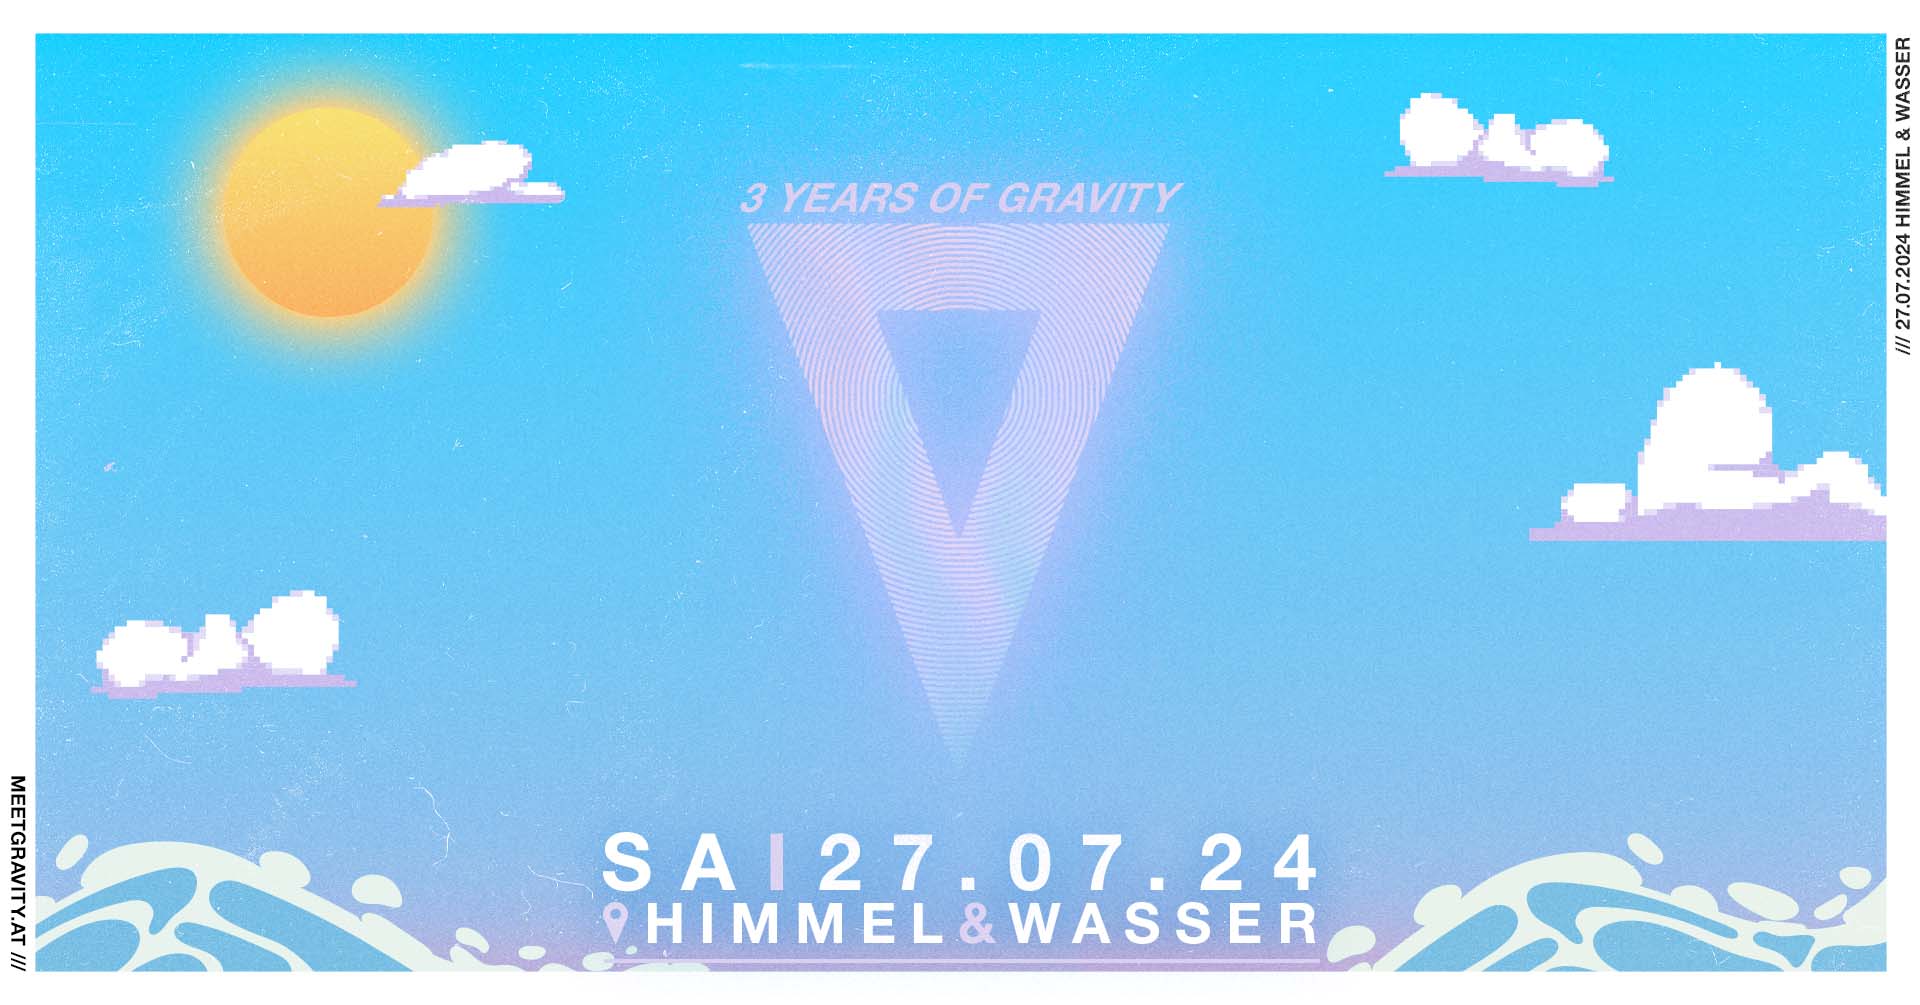 Drum and Bass is back. Gravity in Vienna at Himmel & Wasser on Saturday, 27.07.2024